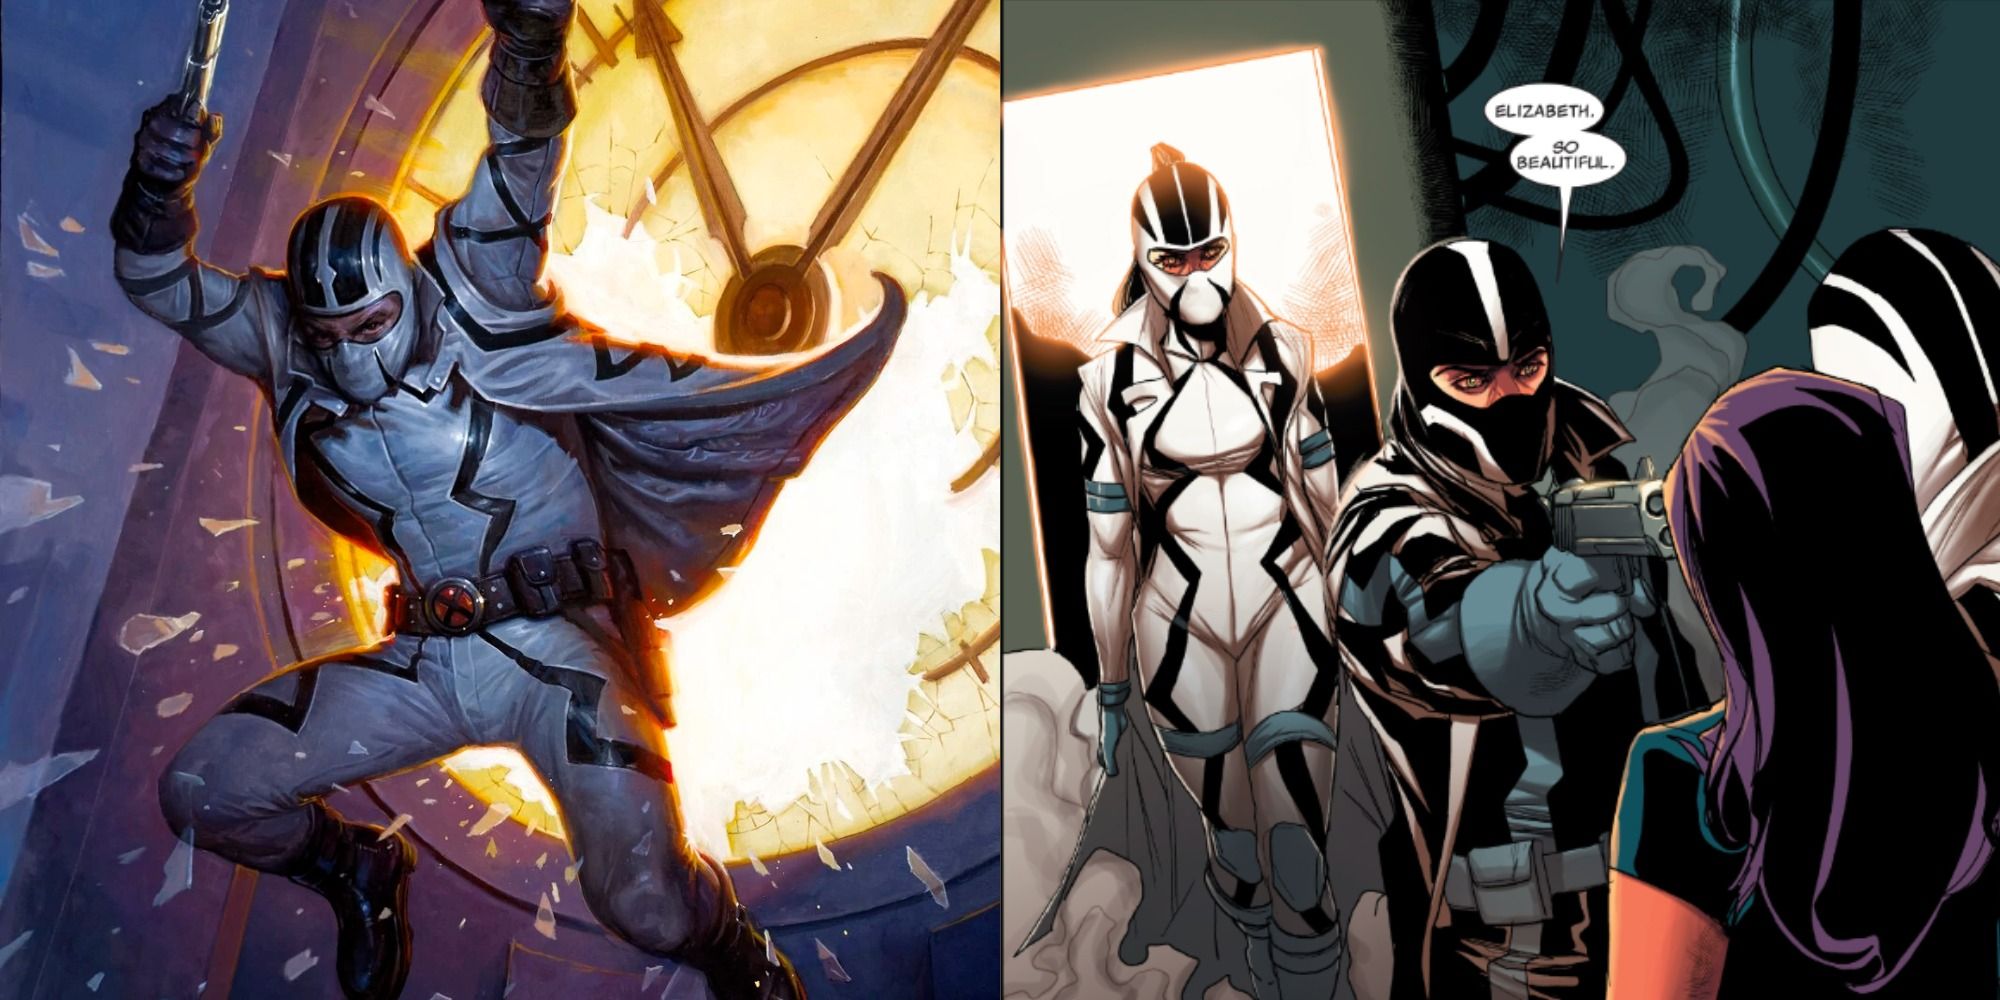 side by side images of Fantomex and his clones Lady Fantomex and Dark